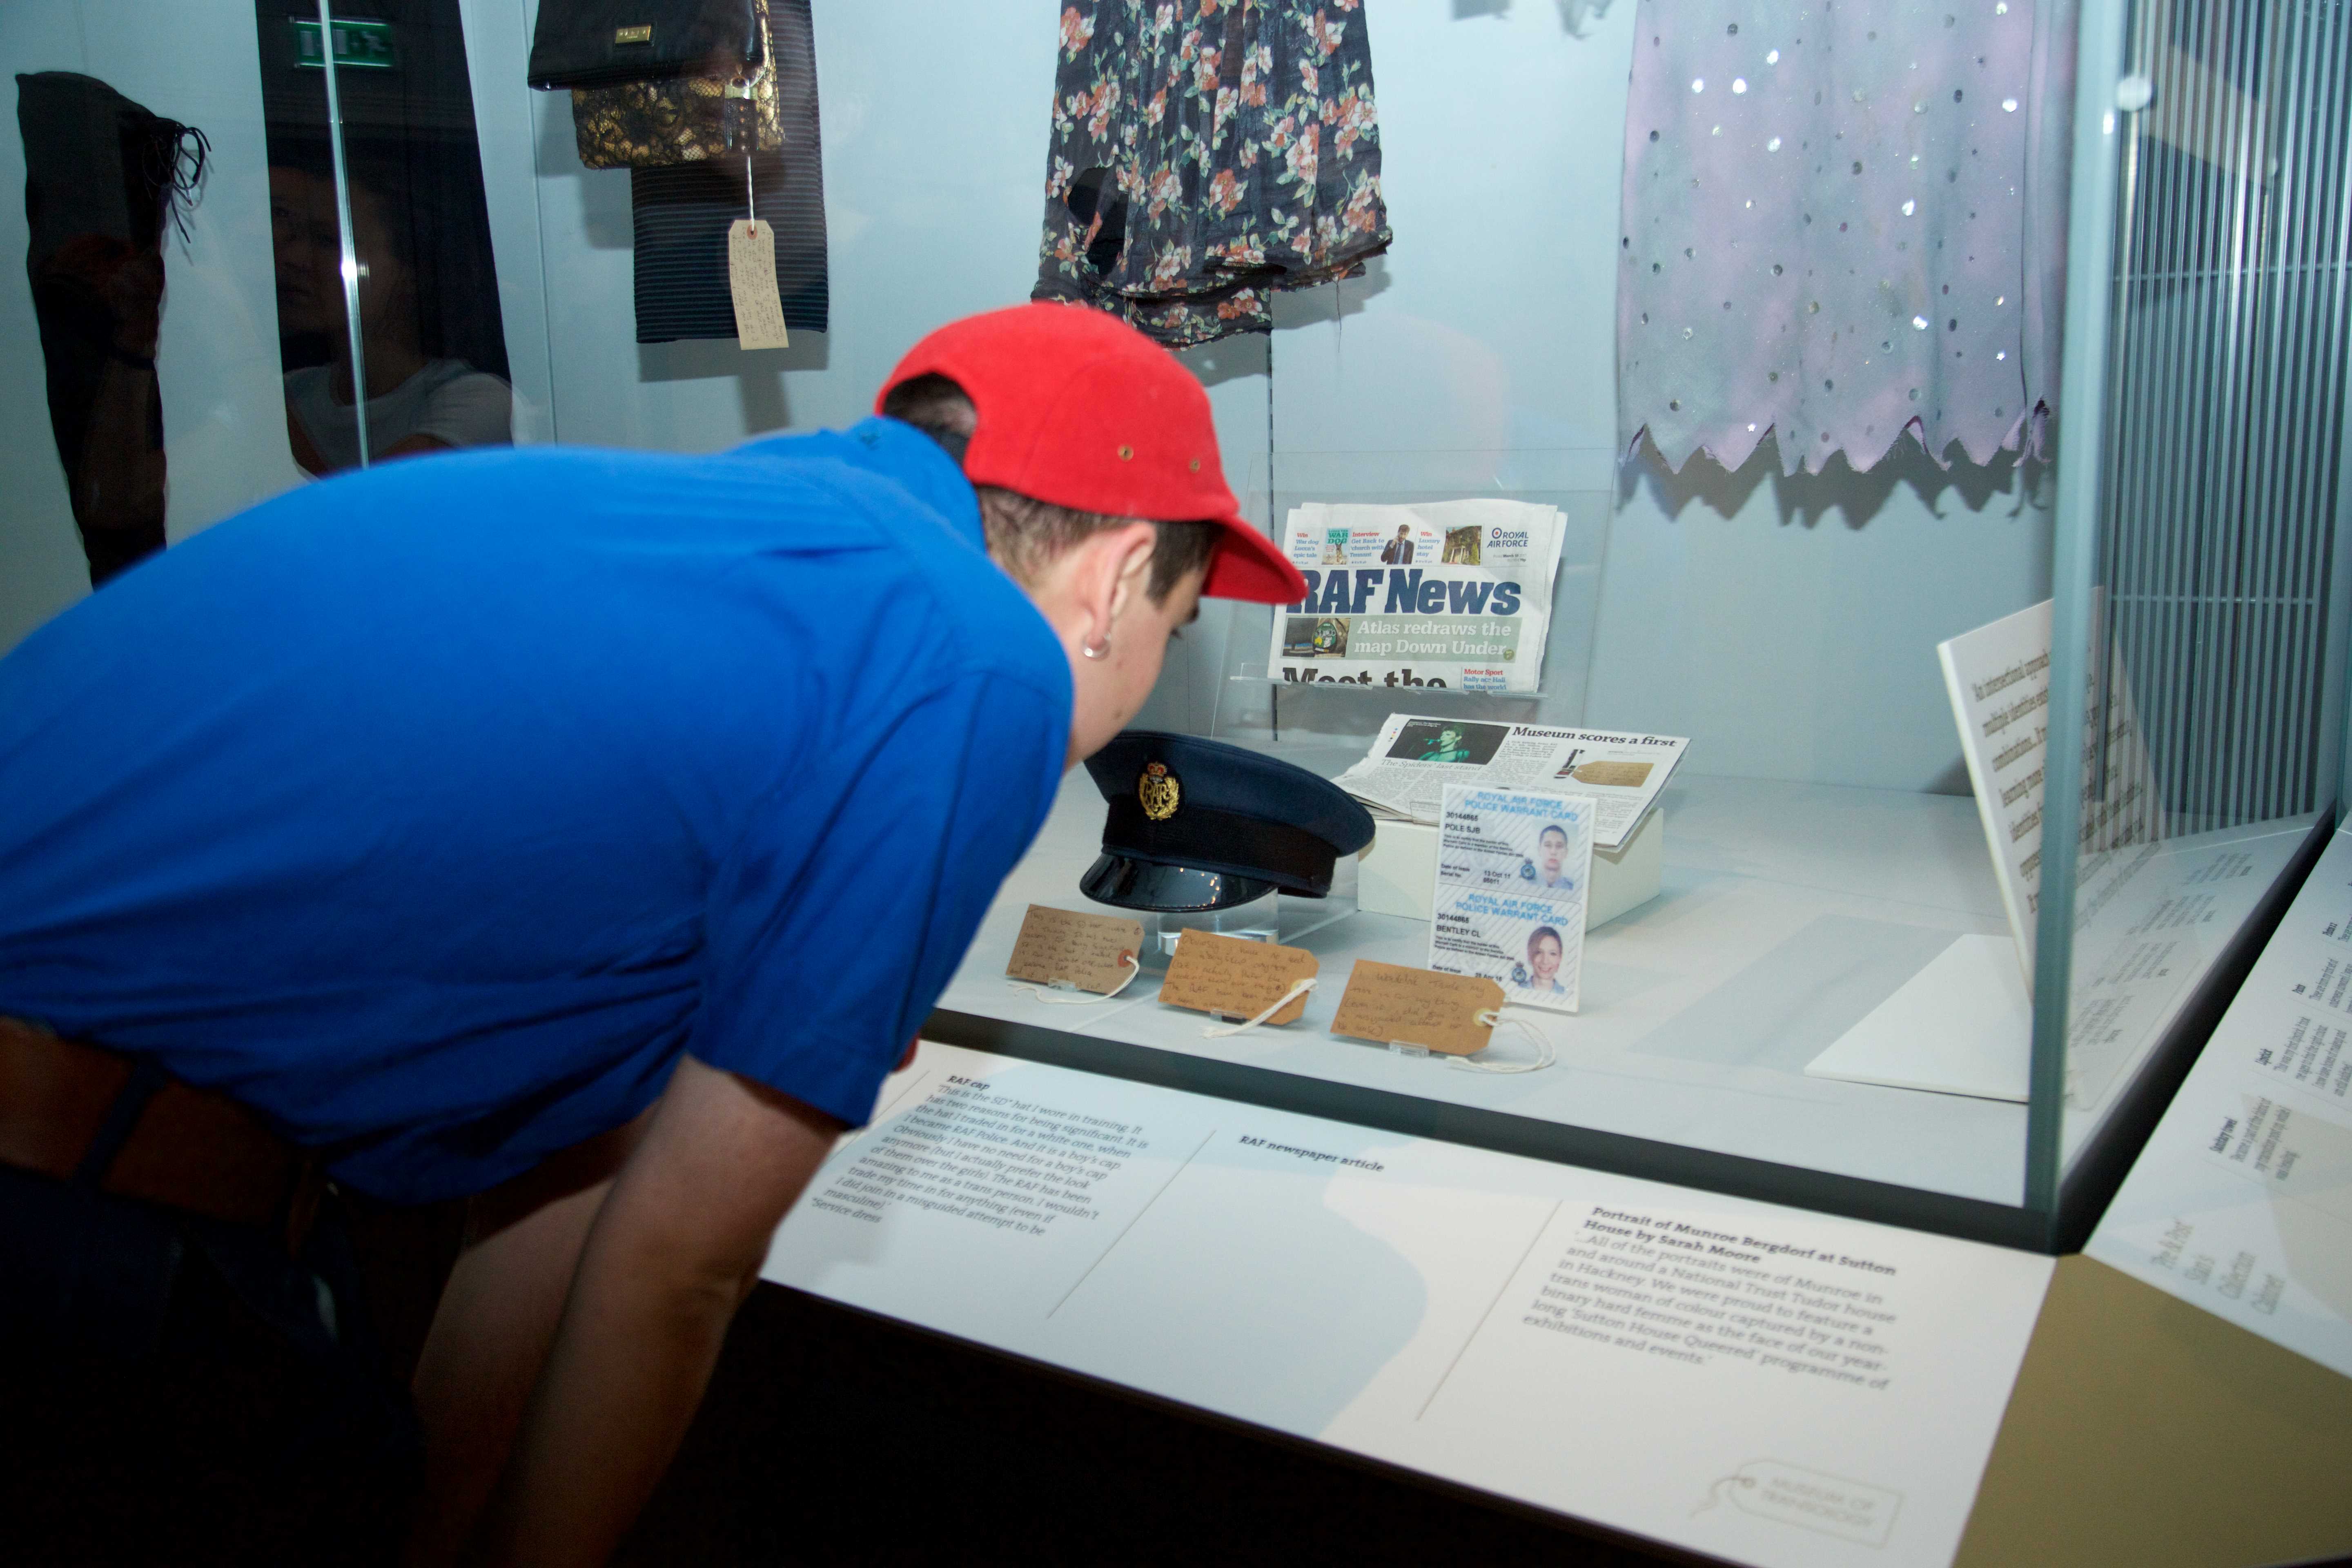 © Museum of Transology, 2017, Brighton Museum & Art Gallery, Image: James Pike Person standing with their back to the photographer in blue shirt and red cap leans over to look at objects in a display case.